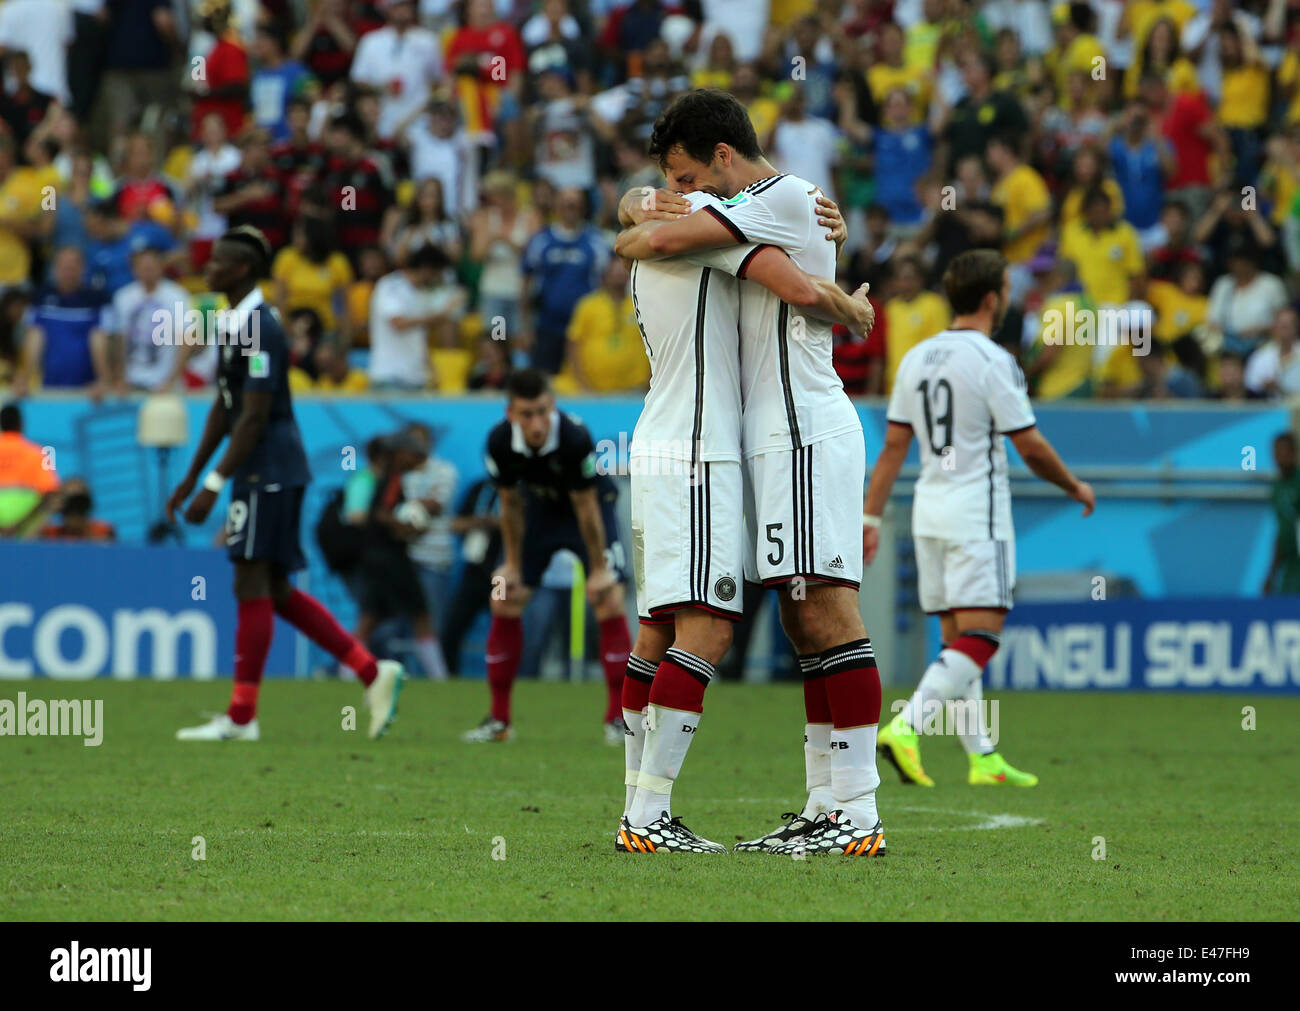 Rio De Janerio, Brazil. 04th July, 2014. FIFA World Cup 2014 quarter final soccer match between France and Germany at Estadio do Maracana in Rio de Janeiro, Brazil. Hummels celebrates at end of match Credit:  Action Plus Sports/Alamy Live News Stock Photo